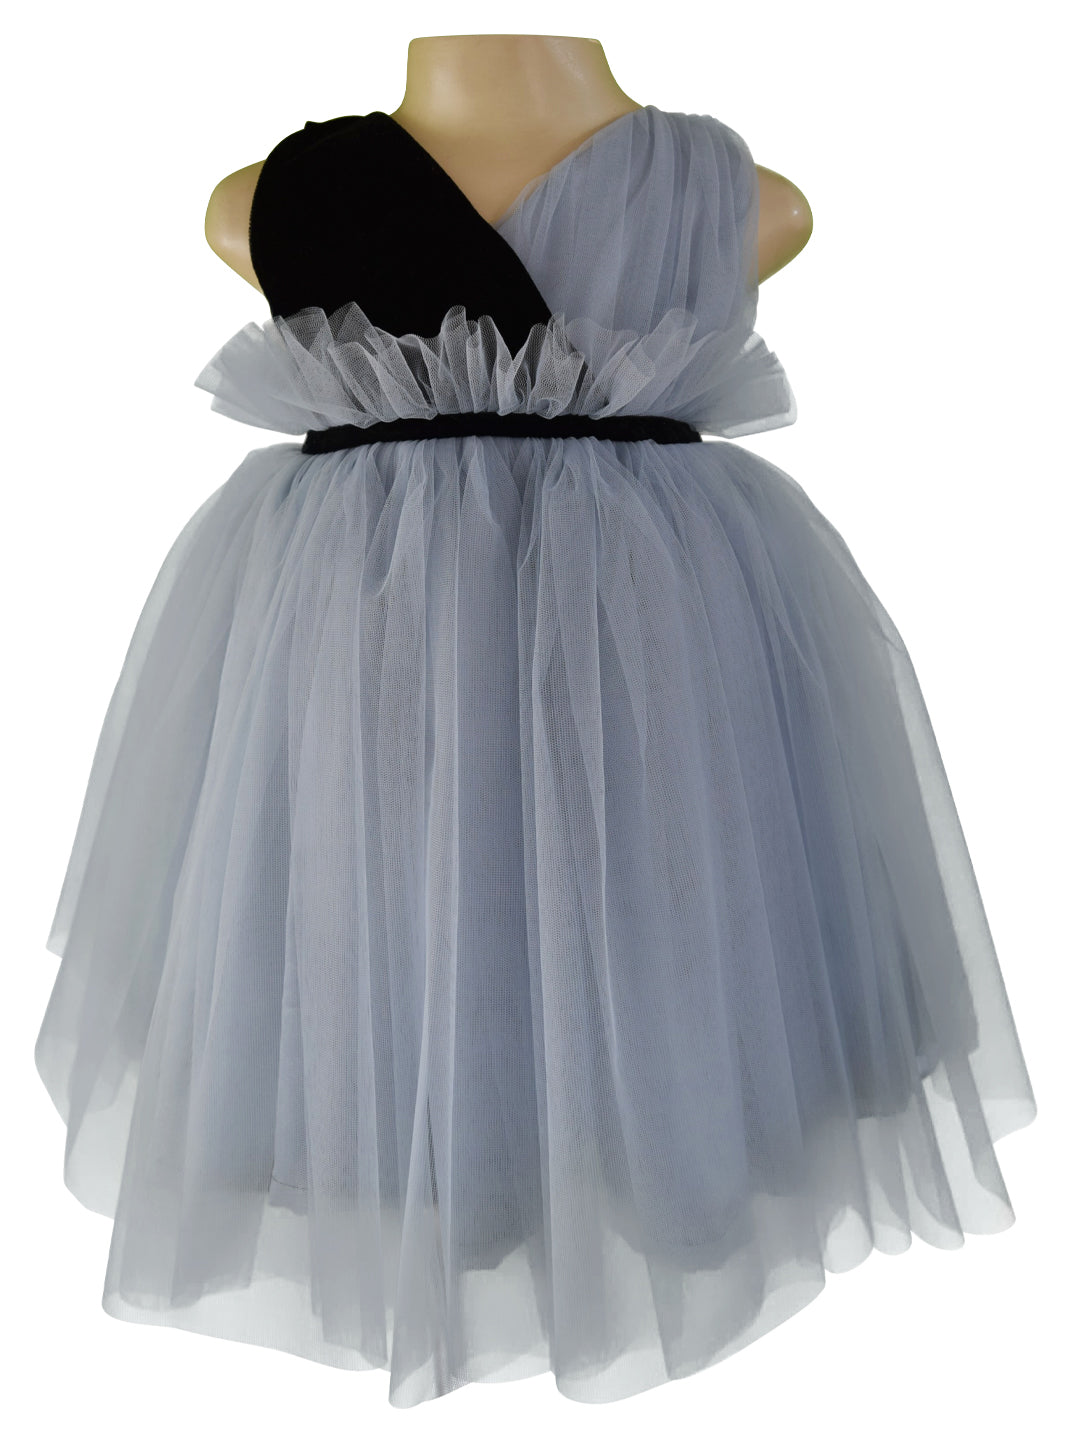 Buy Sequins Baby Girls Fish Cut Gown Party Dress Online